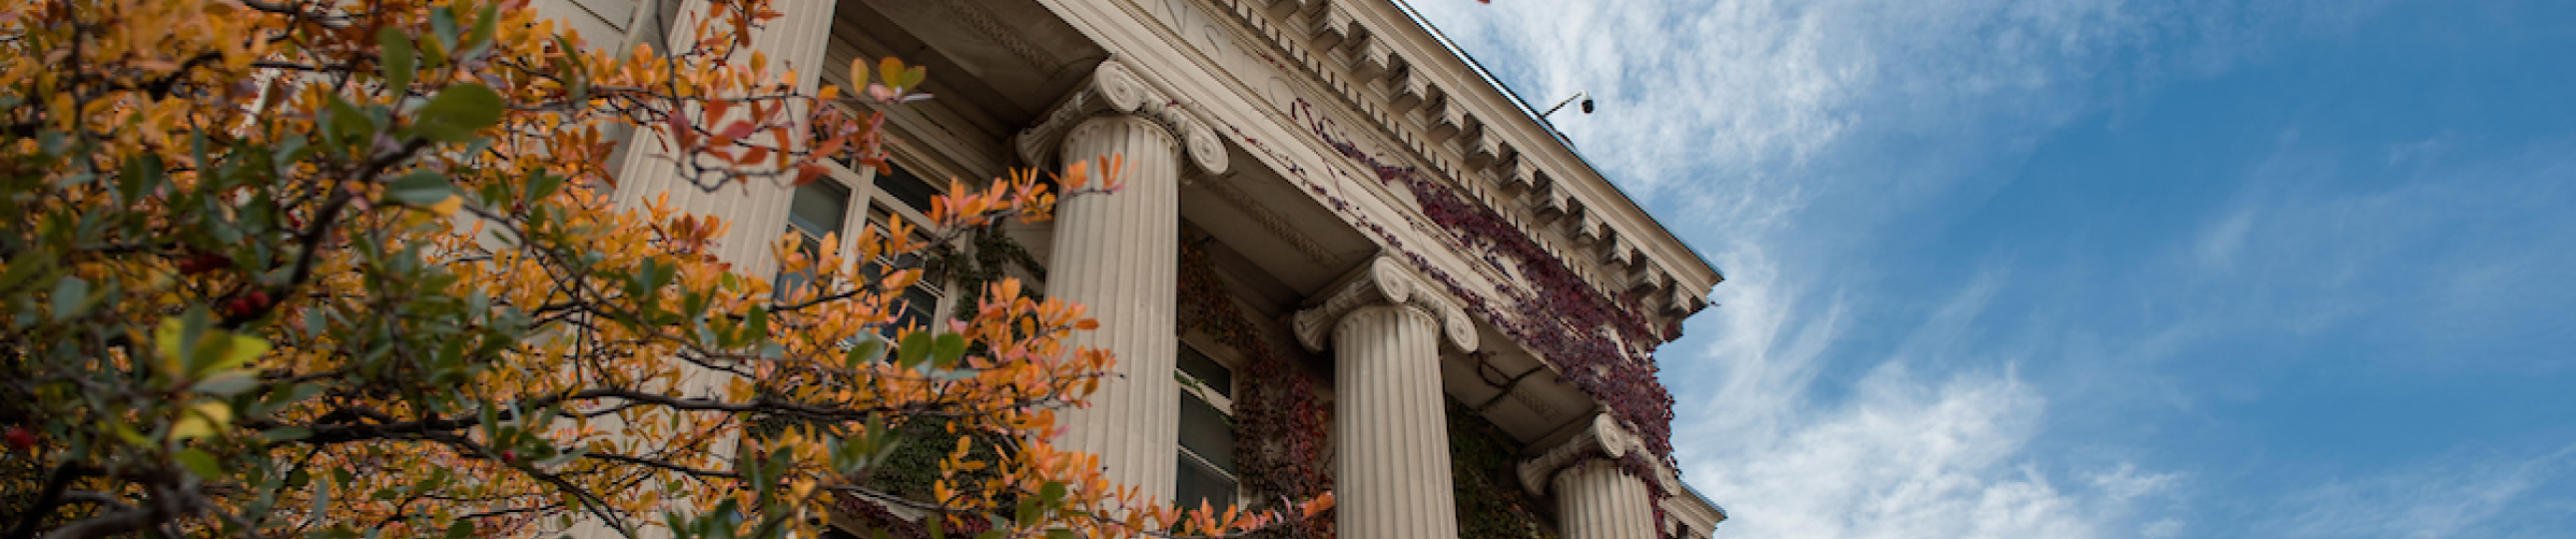 abstract photo of campus building with columns and fall foliage